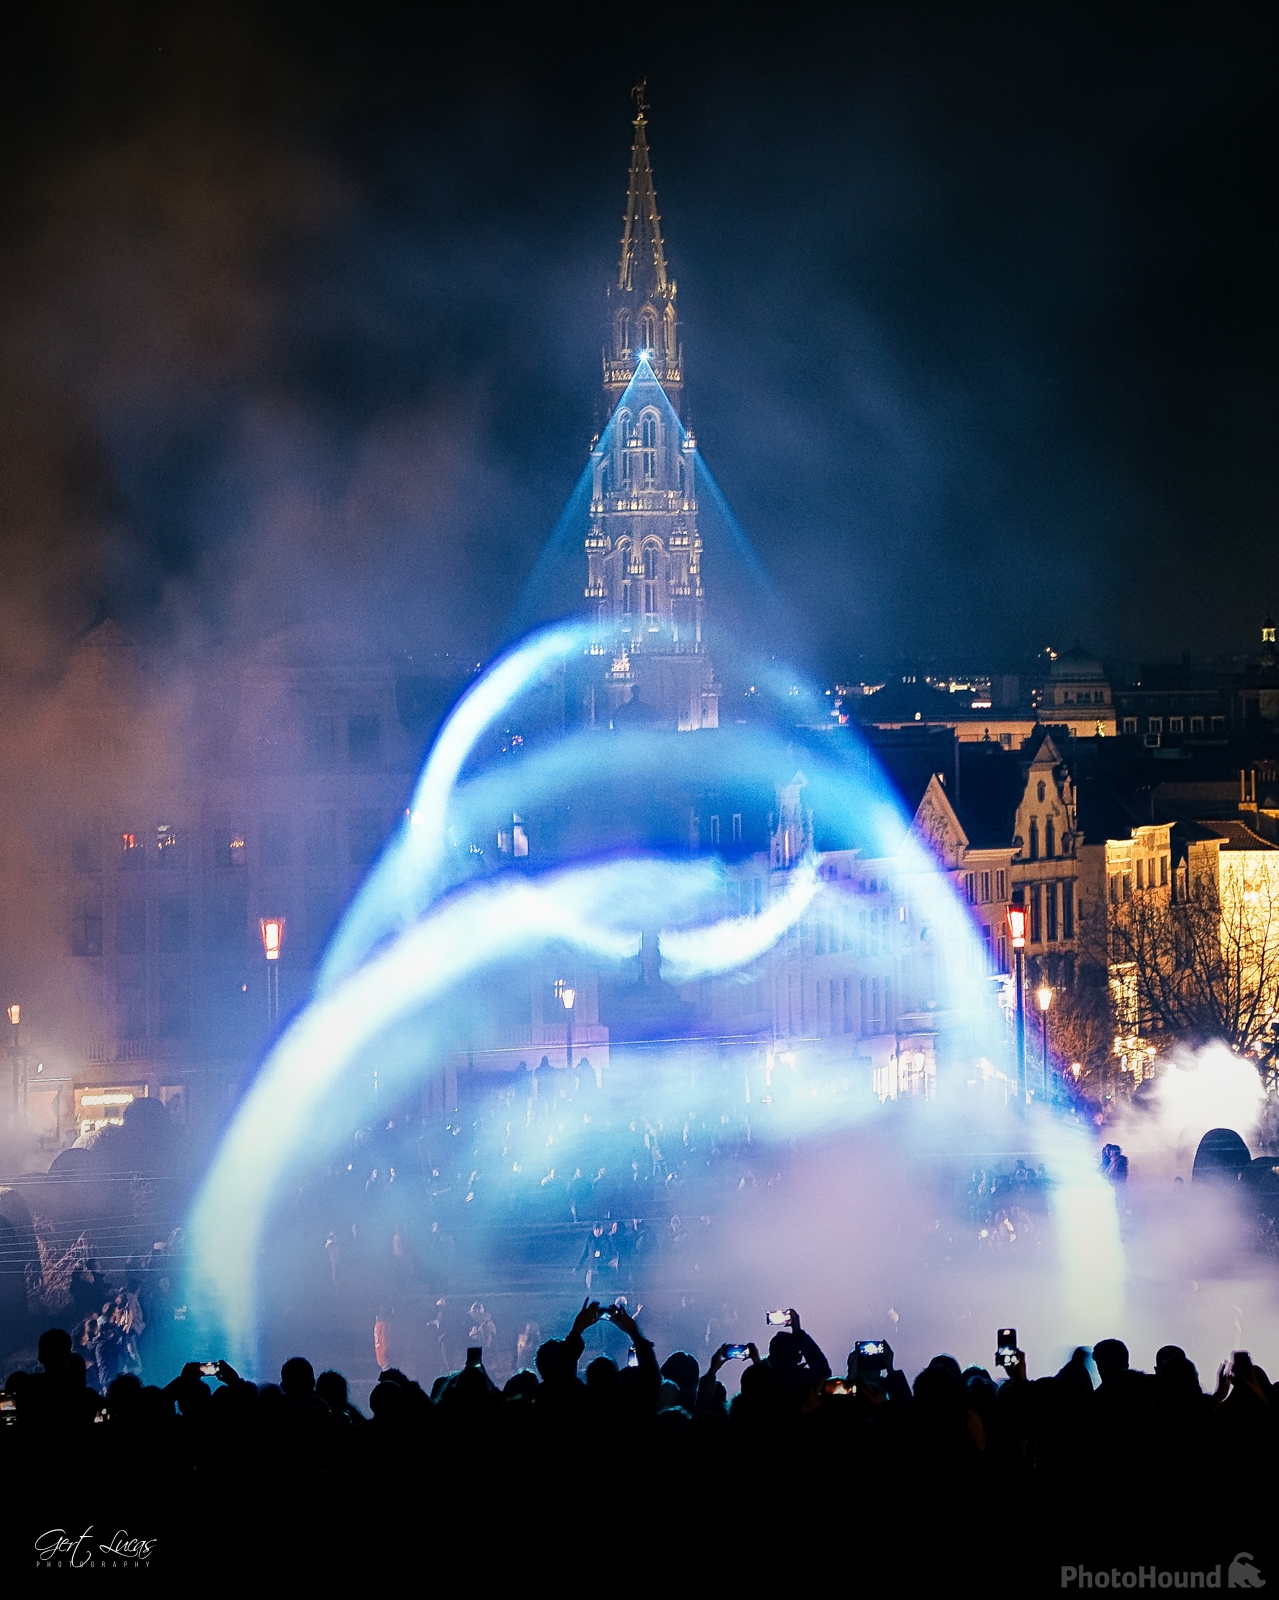 Image of Brussels Bright - Light festival by Gert Lucas